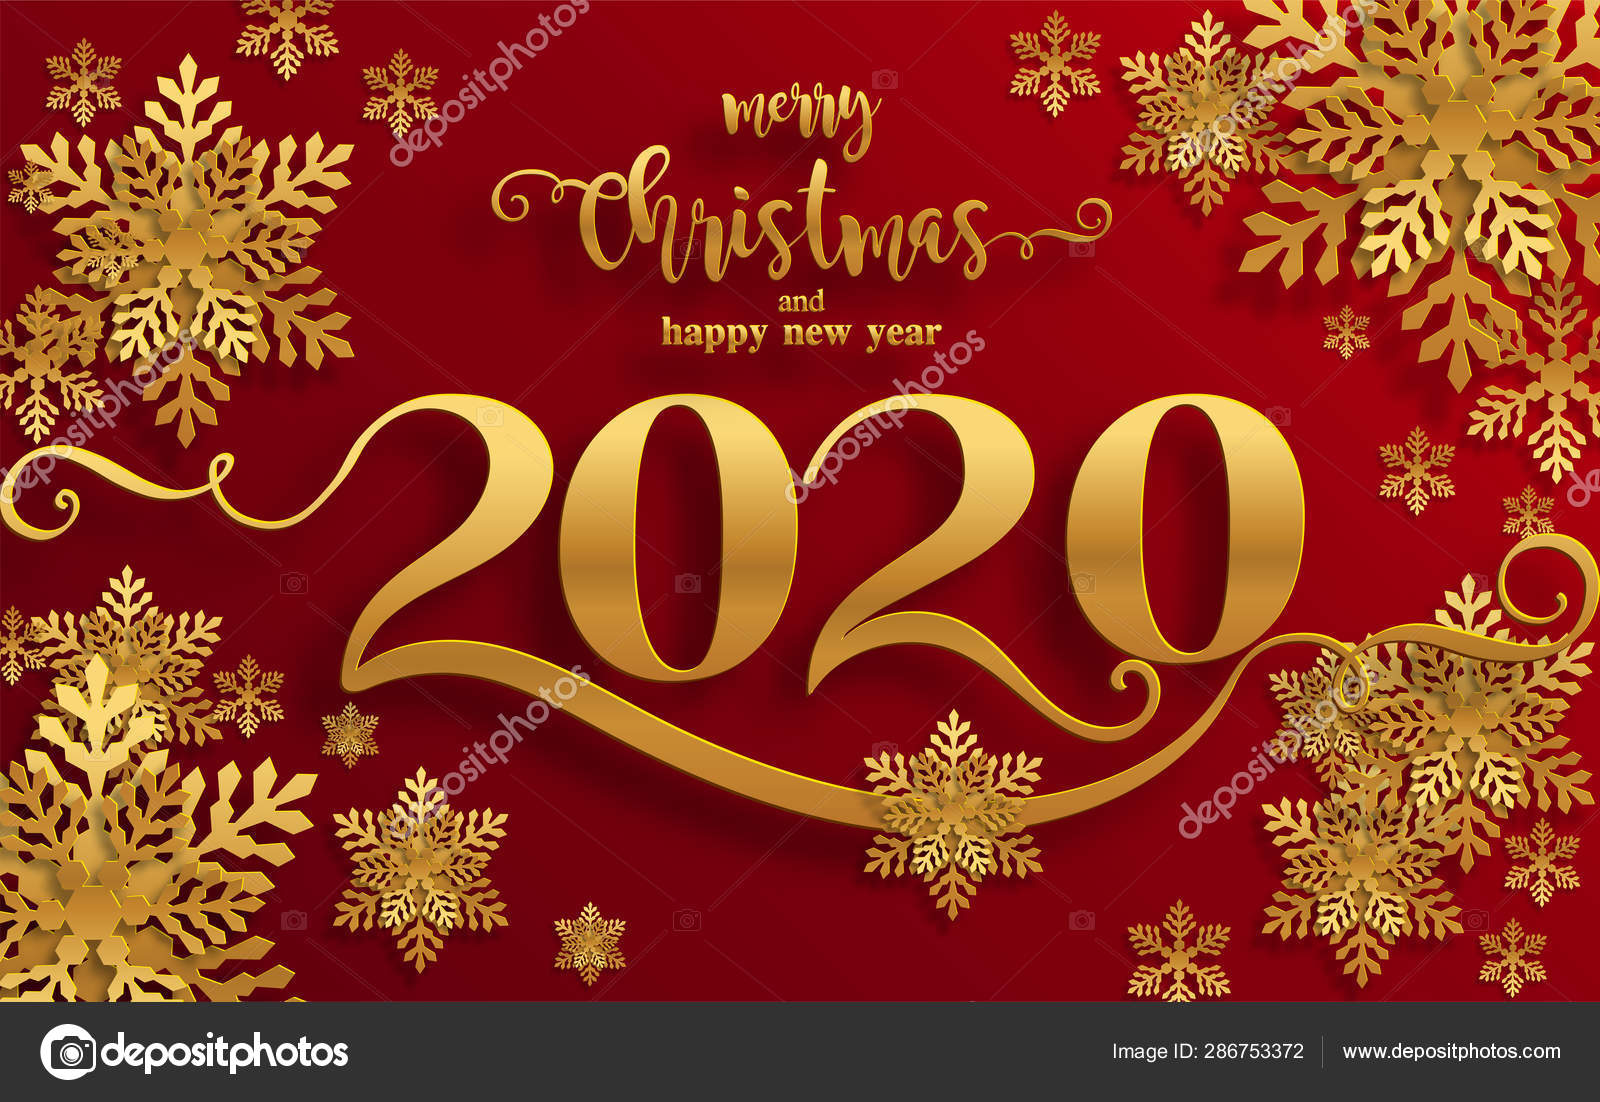 Merry Christmas Wishes 2020